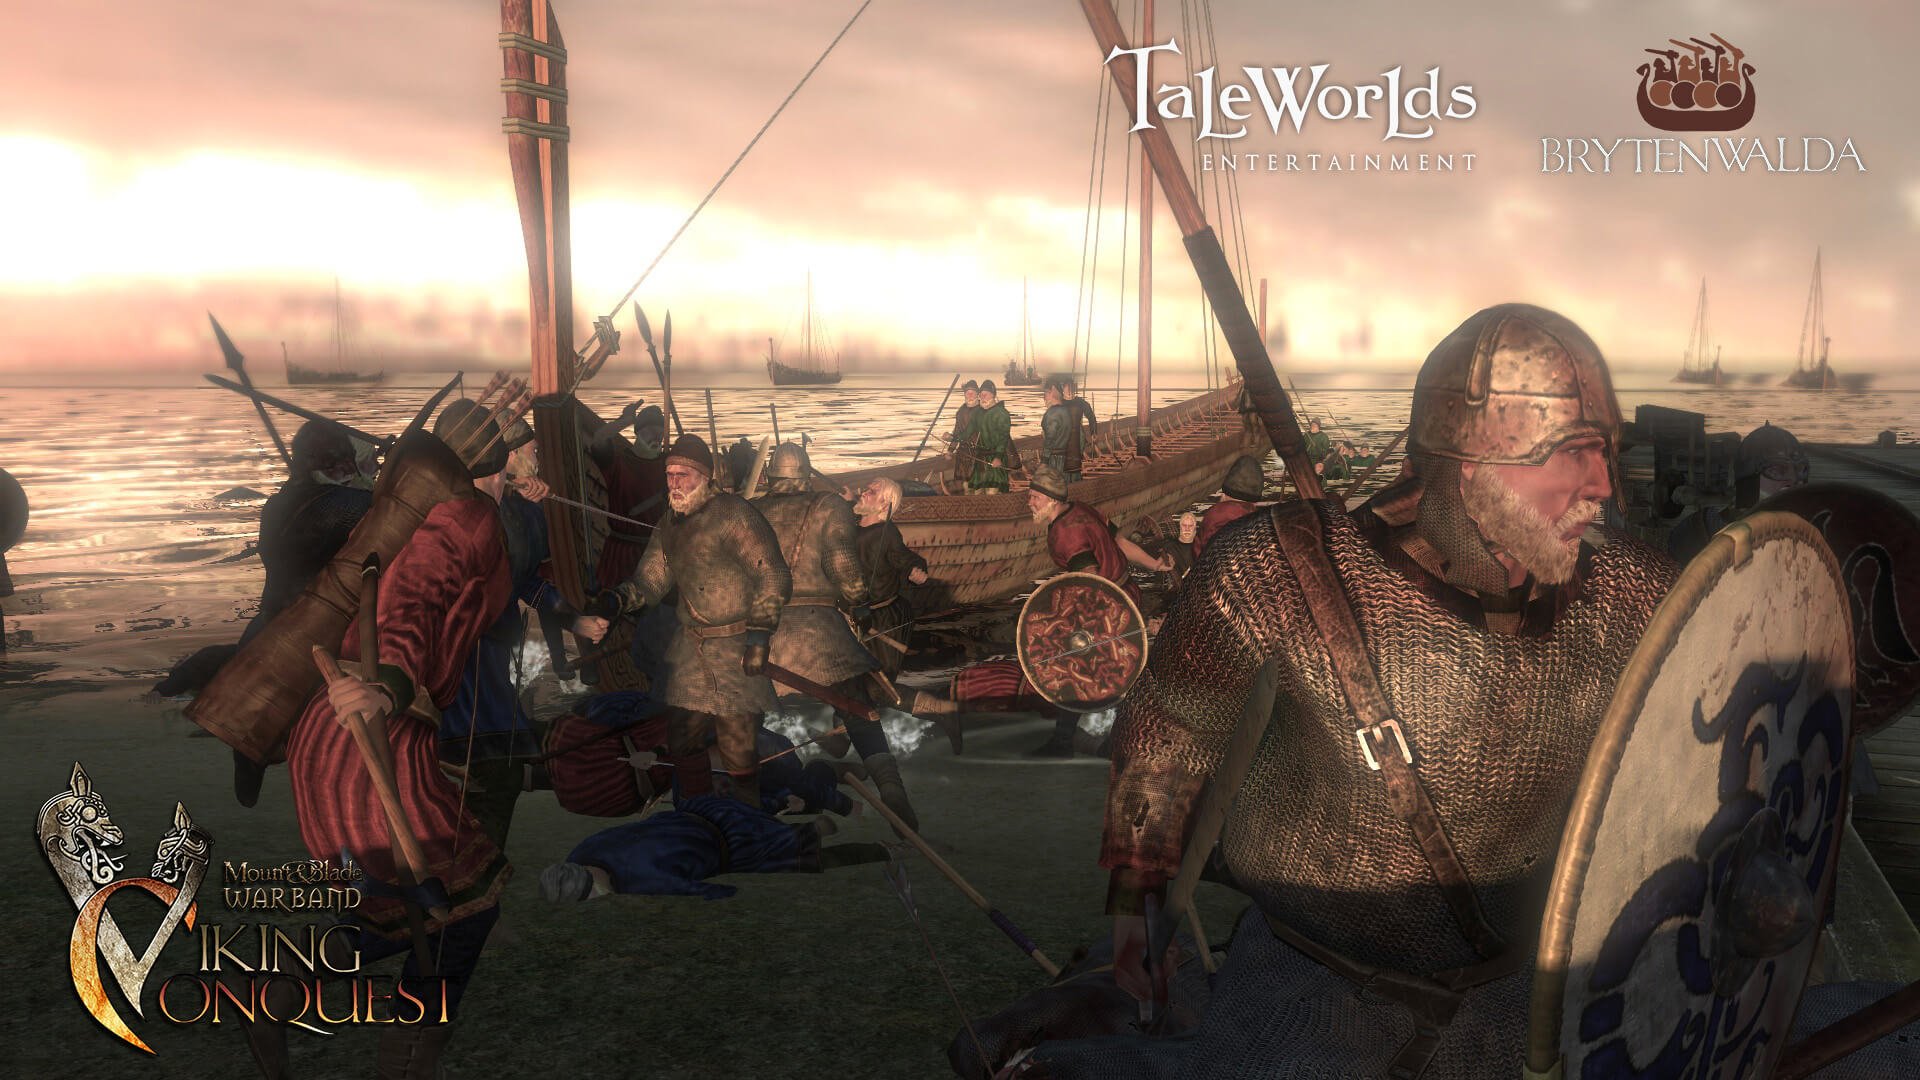 mount and blade warband 1.172 crack